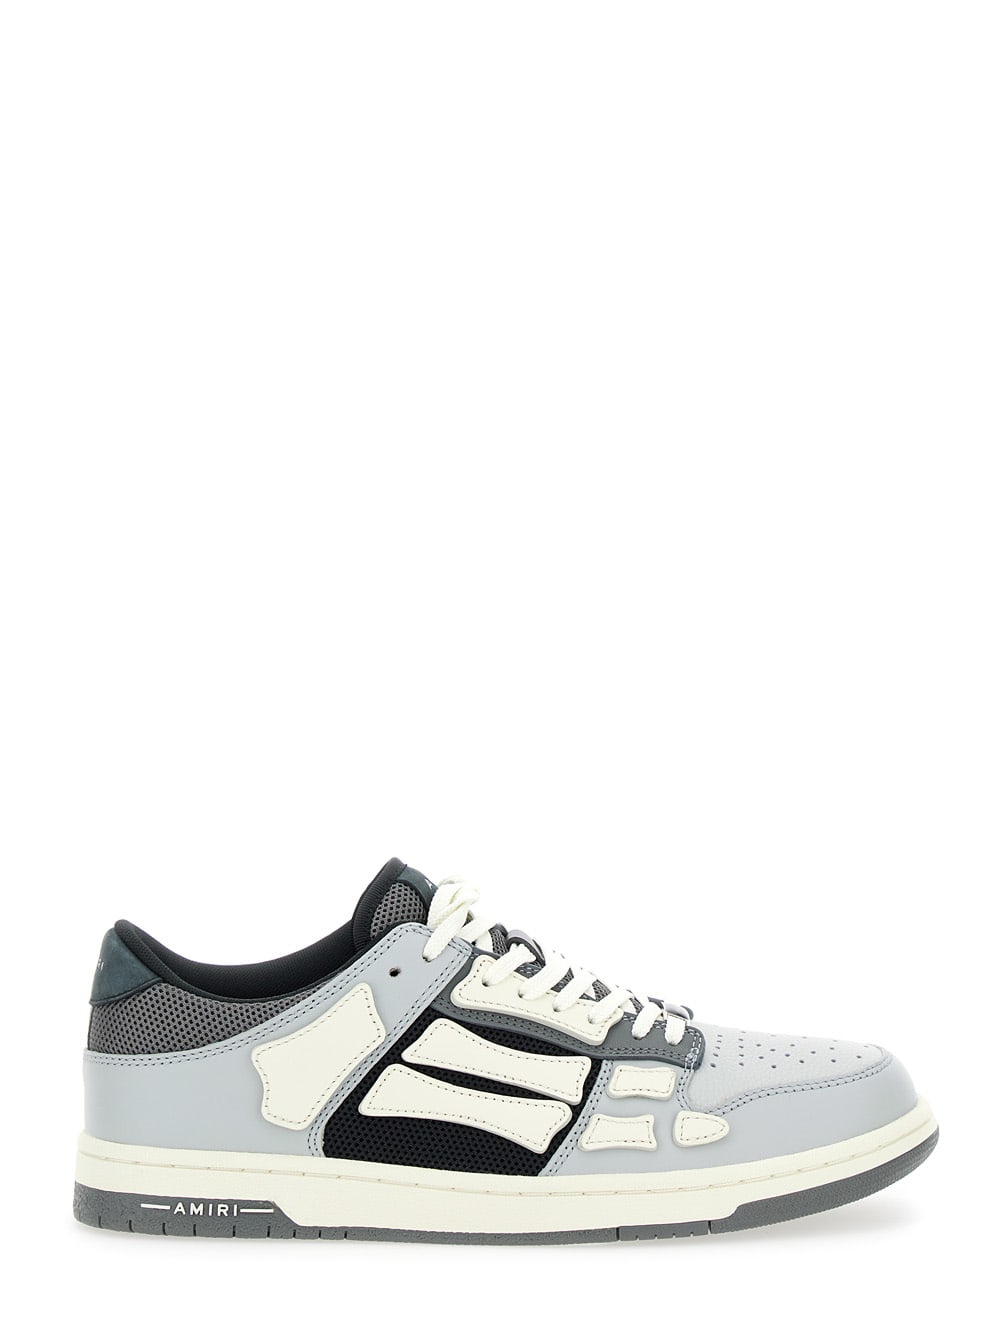 AMIRI GREY LOW TOP SNEAKERS WITH PANELS IN LEATHER MAN